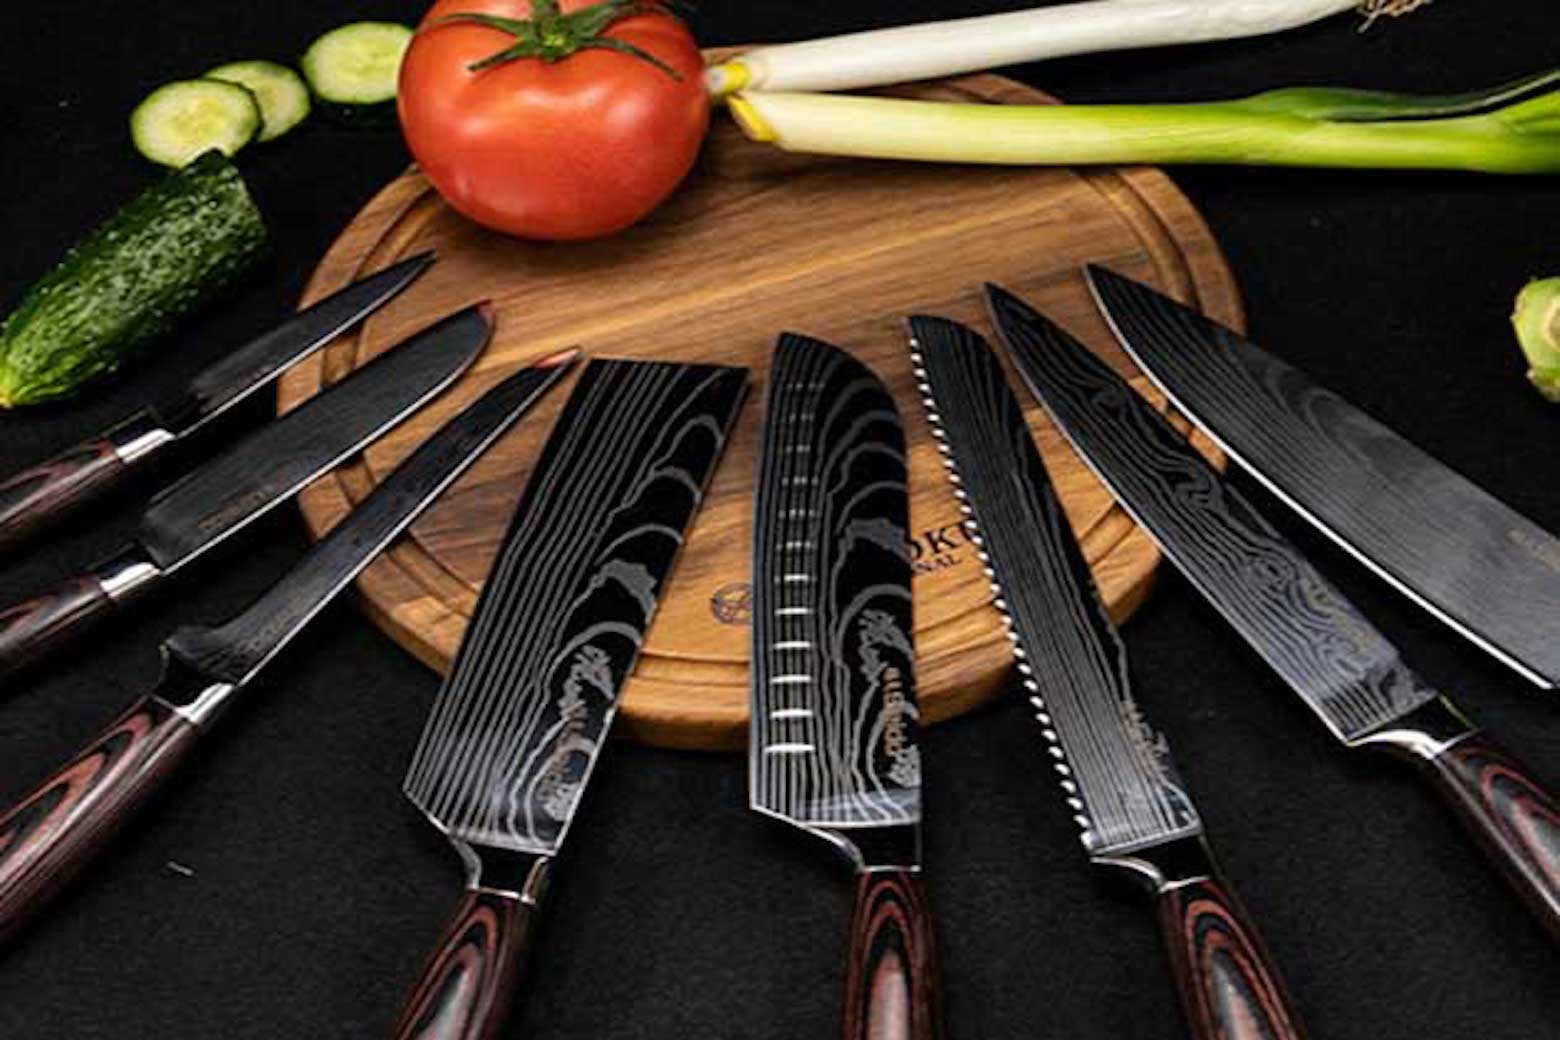 Seido Knives  High-Quality Japanese, Chef & Kitchen Knives